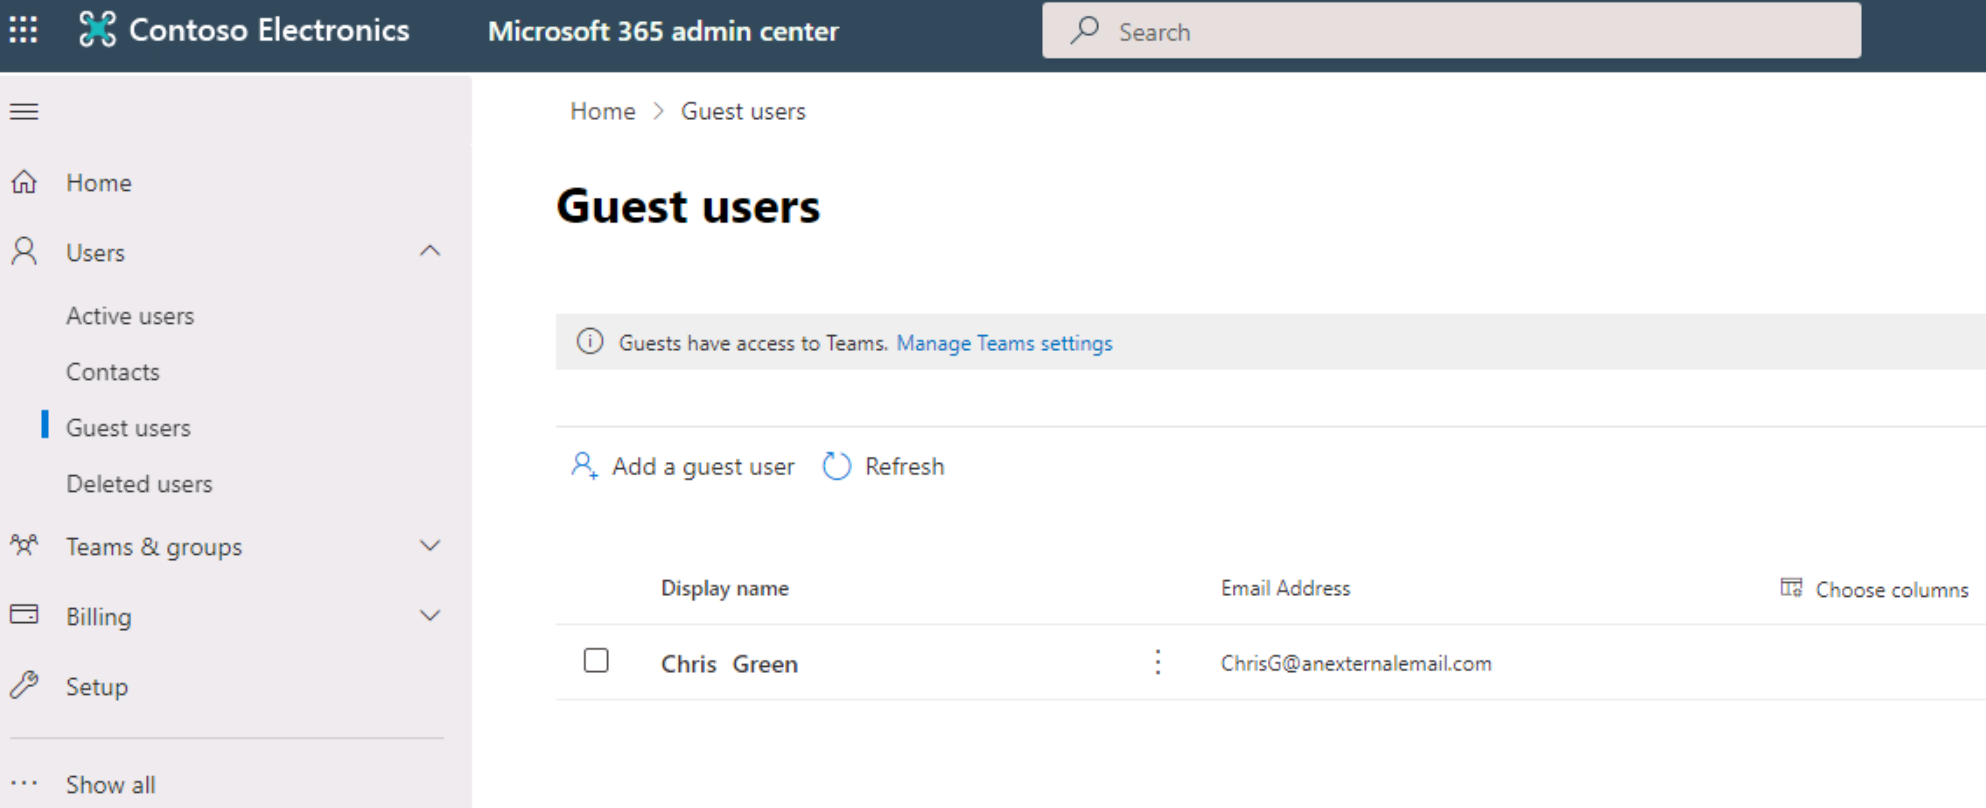 Screenshot of the Microsoft 365 admin center, opened to the guest users page.